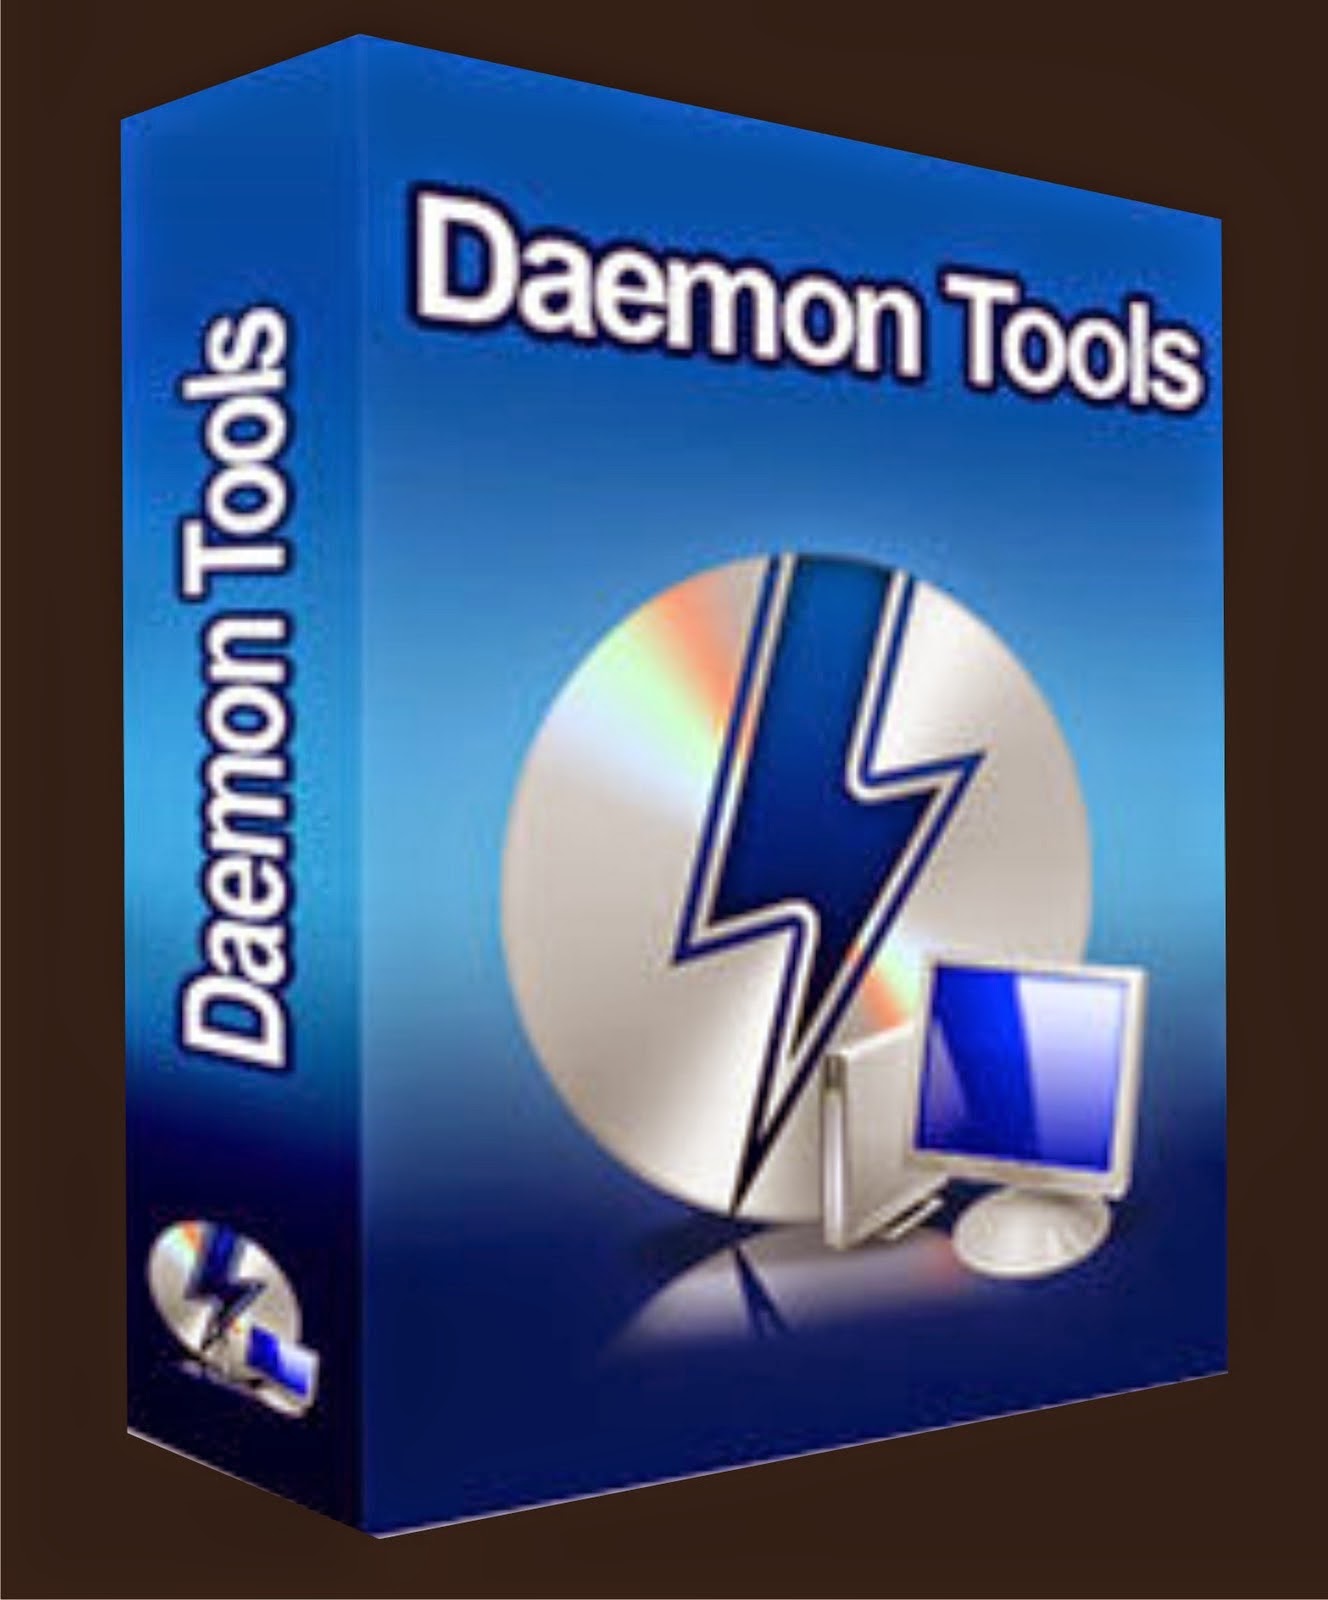 daemon tools pro free download for windows 10